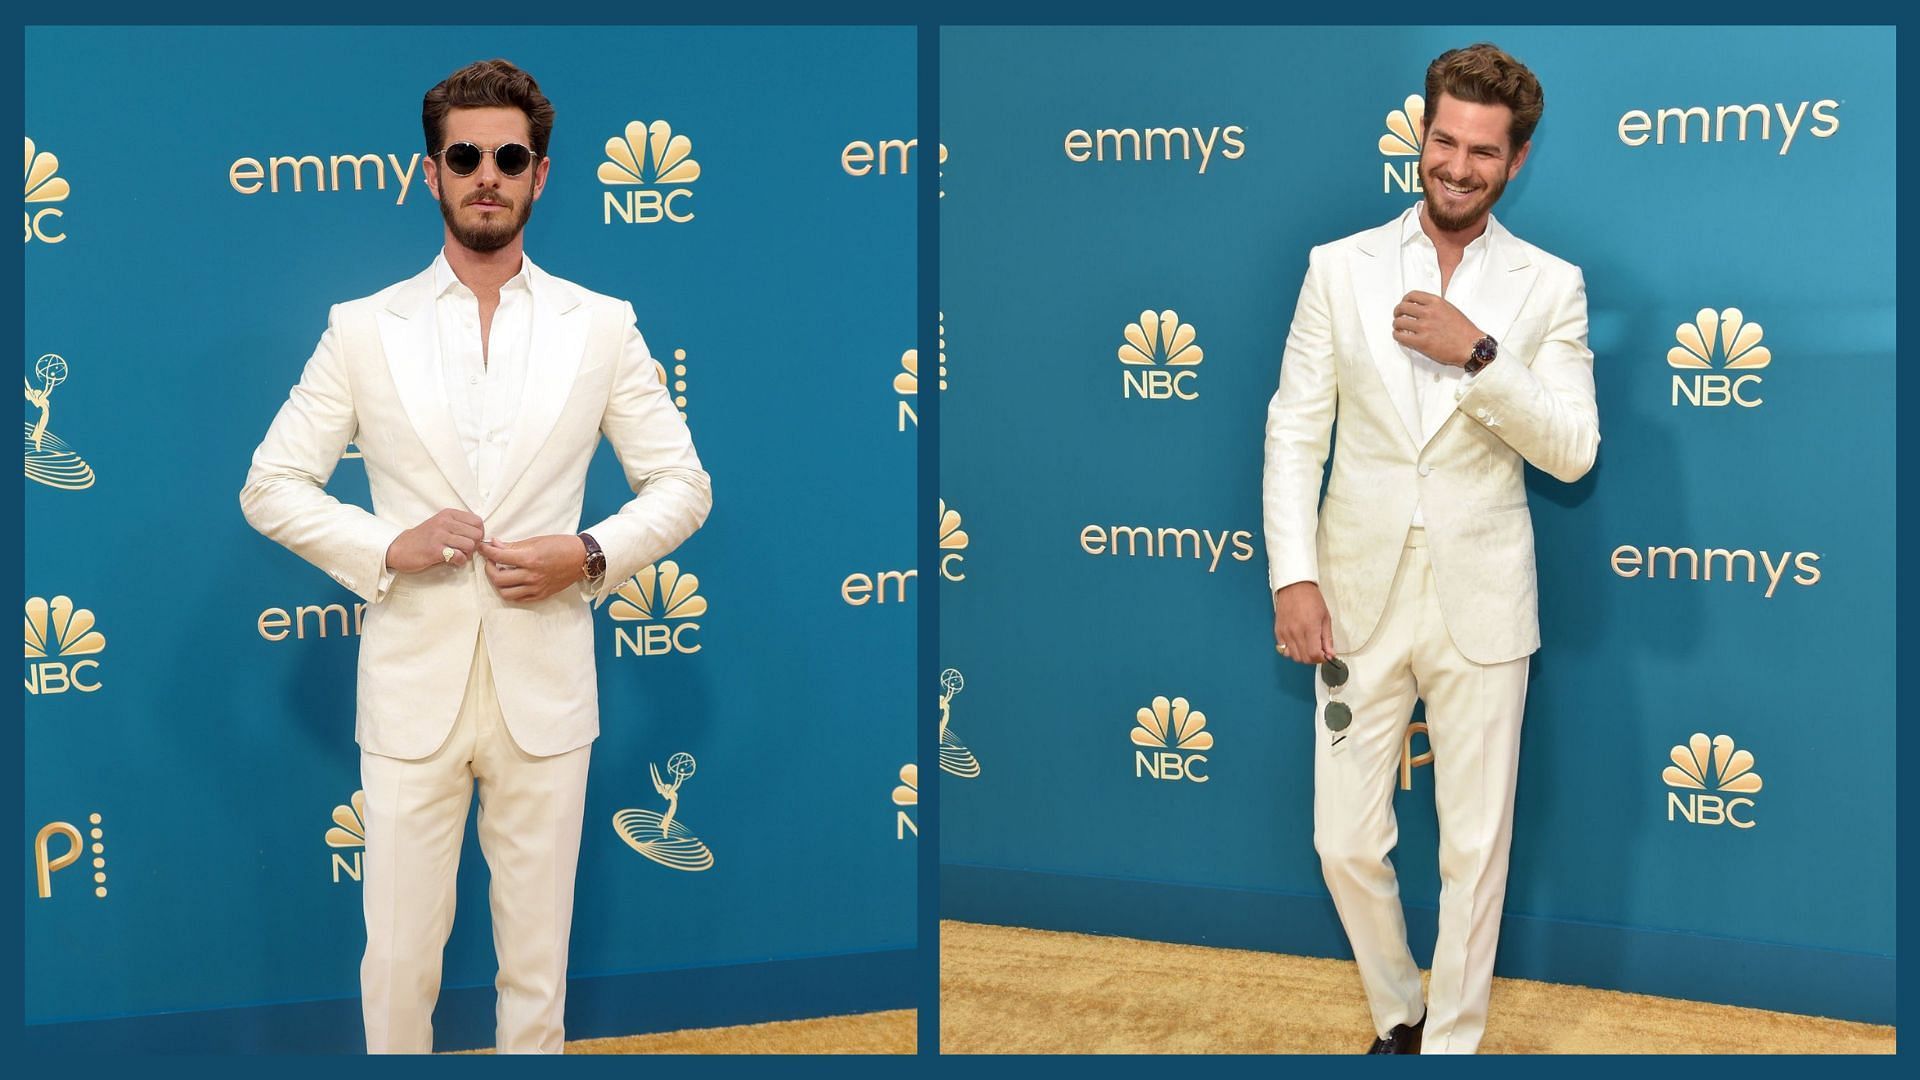 Andrew Garfield at the 74th Primetime Emmy Awards (Image via Twitter/@emmachapman)